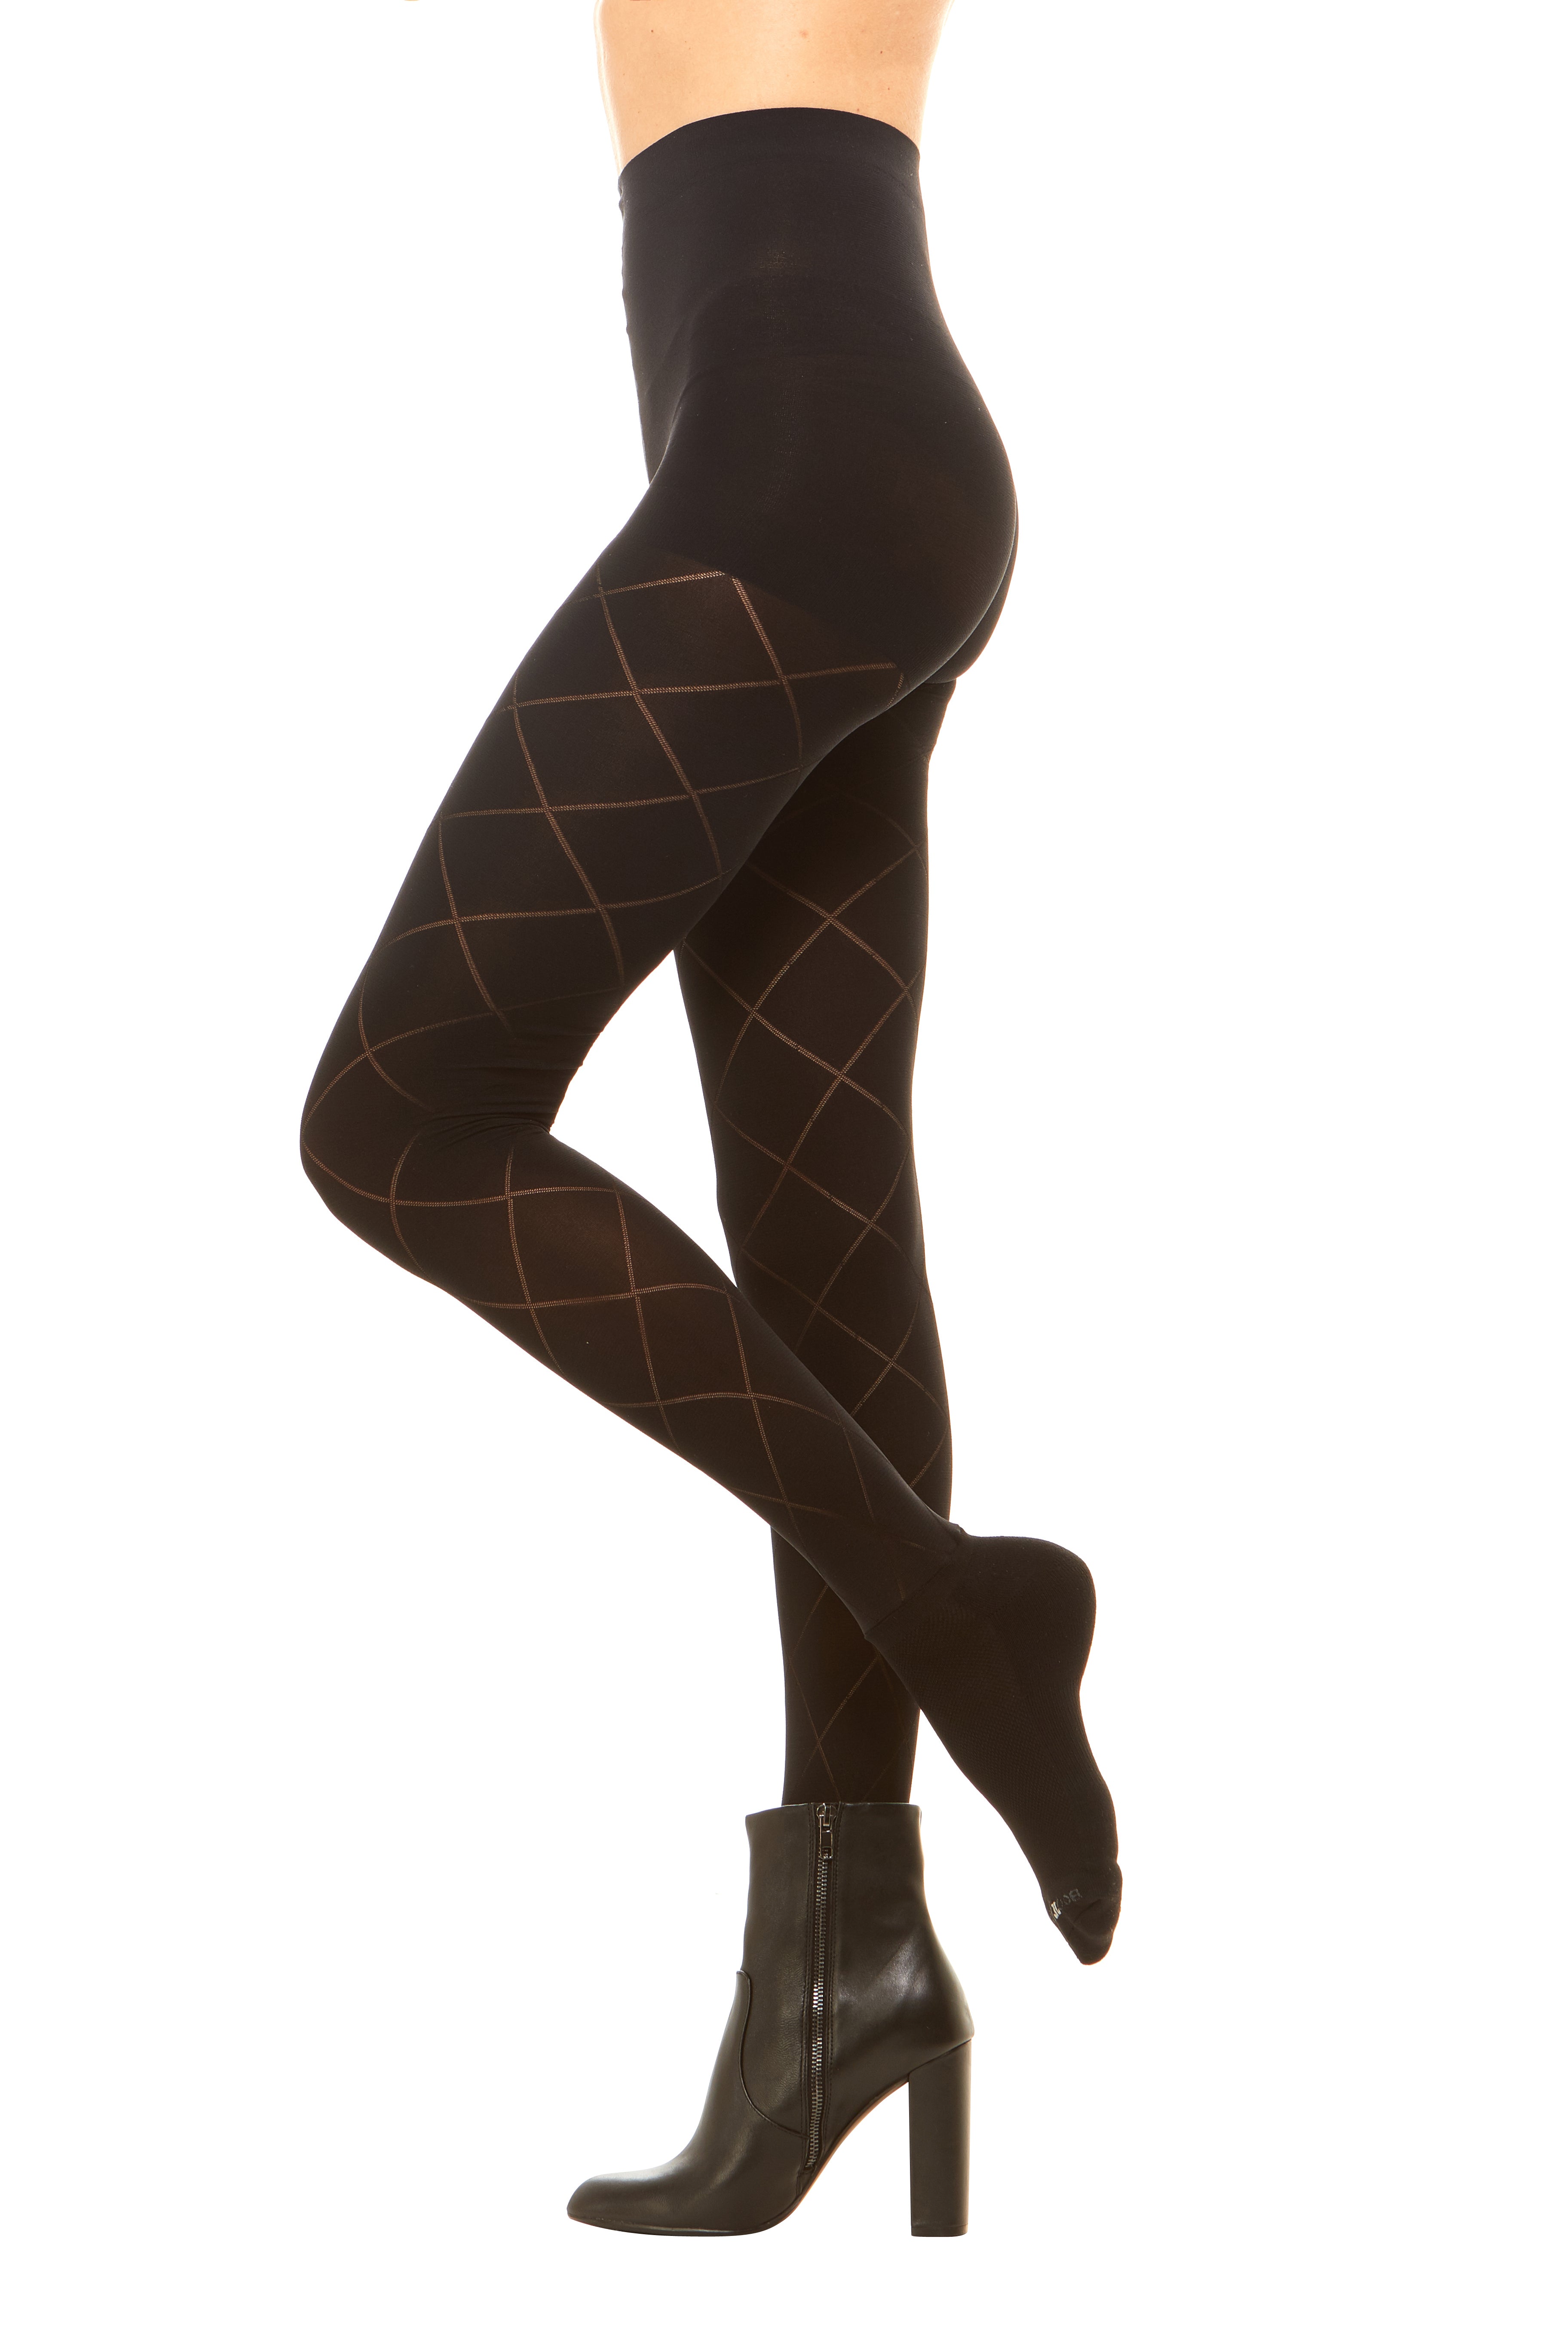 Premium semi opaque women’s tights in a diamond pattern with attached performance athletic socks and tummy control waistband 